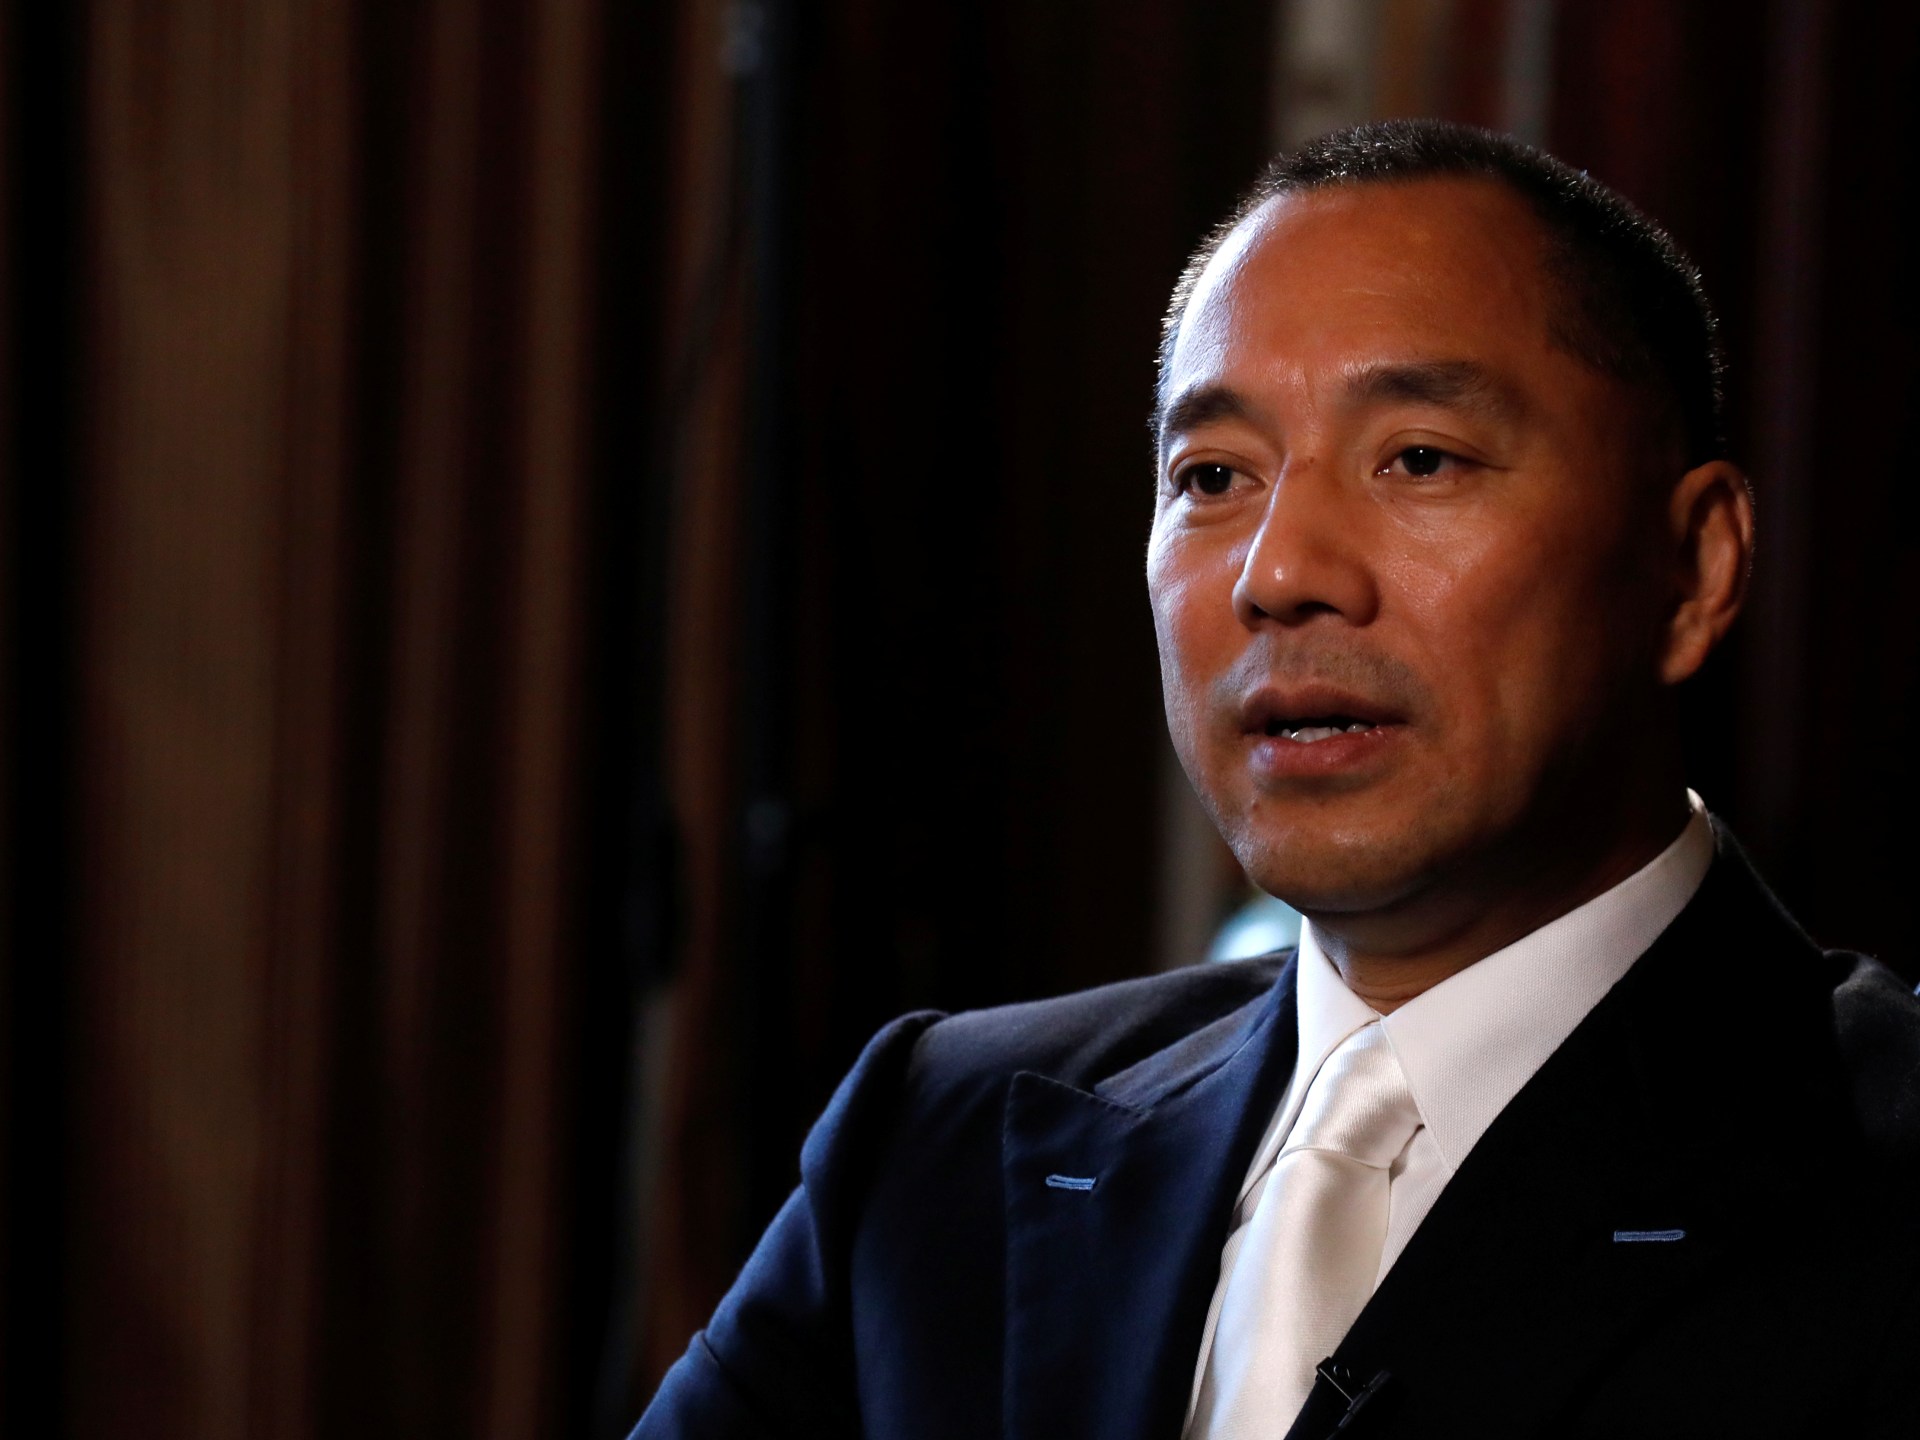 US Charges Chinese Businessman Guo Wengui With Fraud